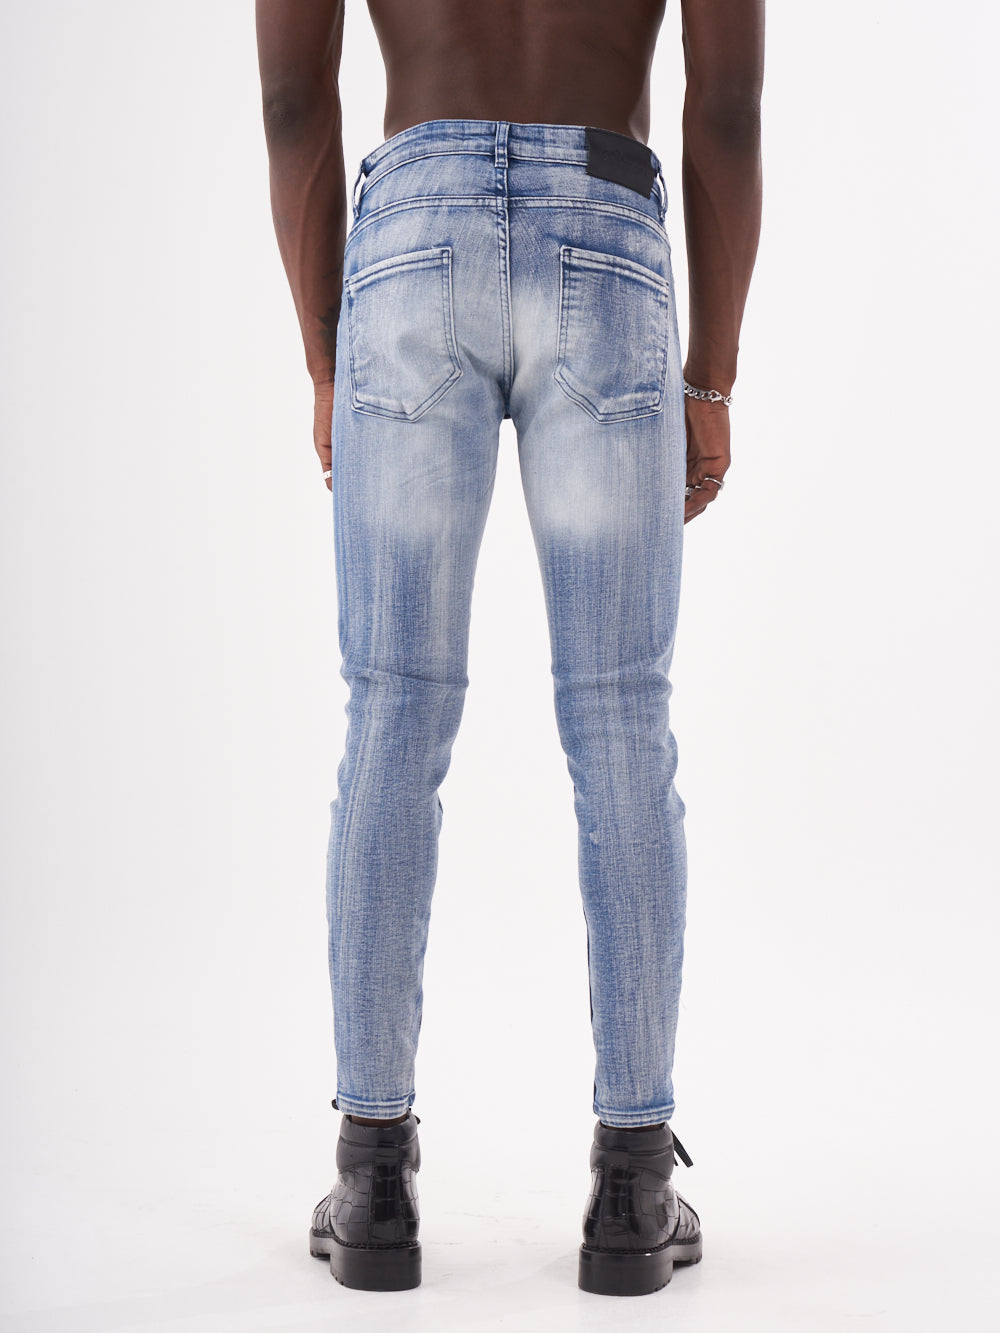 Patched Ripped Jeans - | MUTANT JEANS